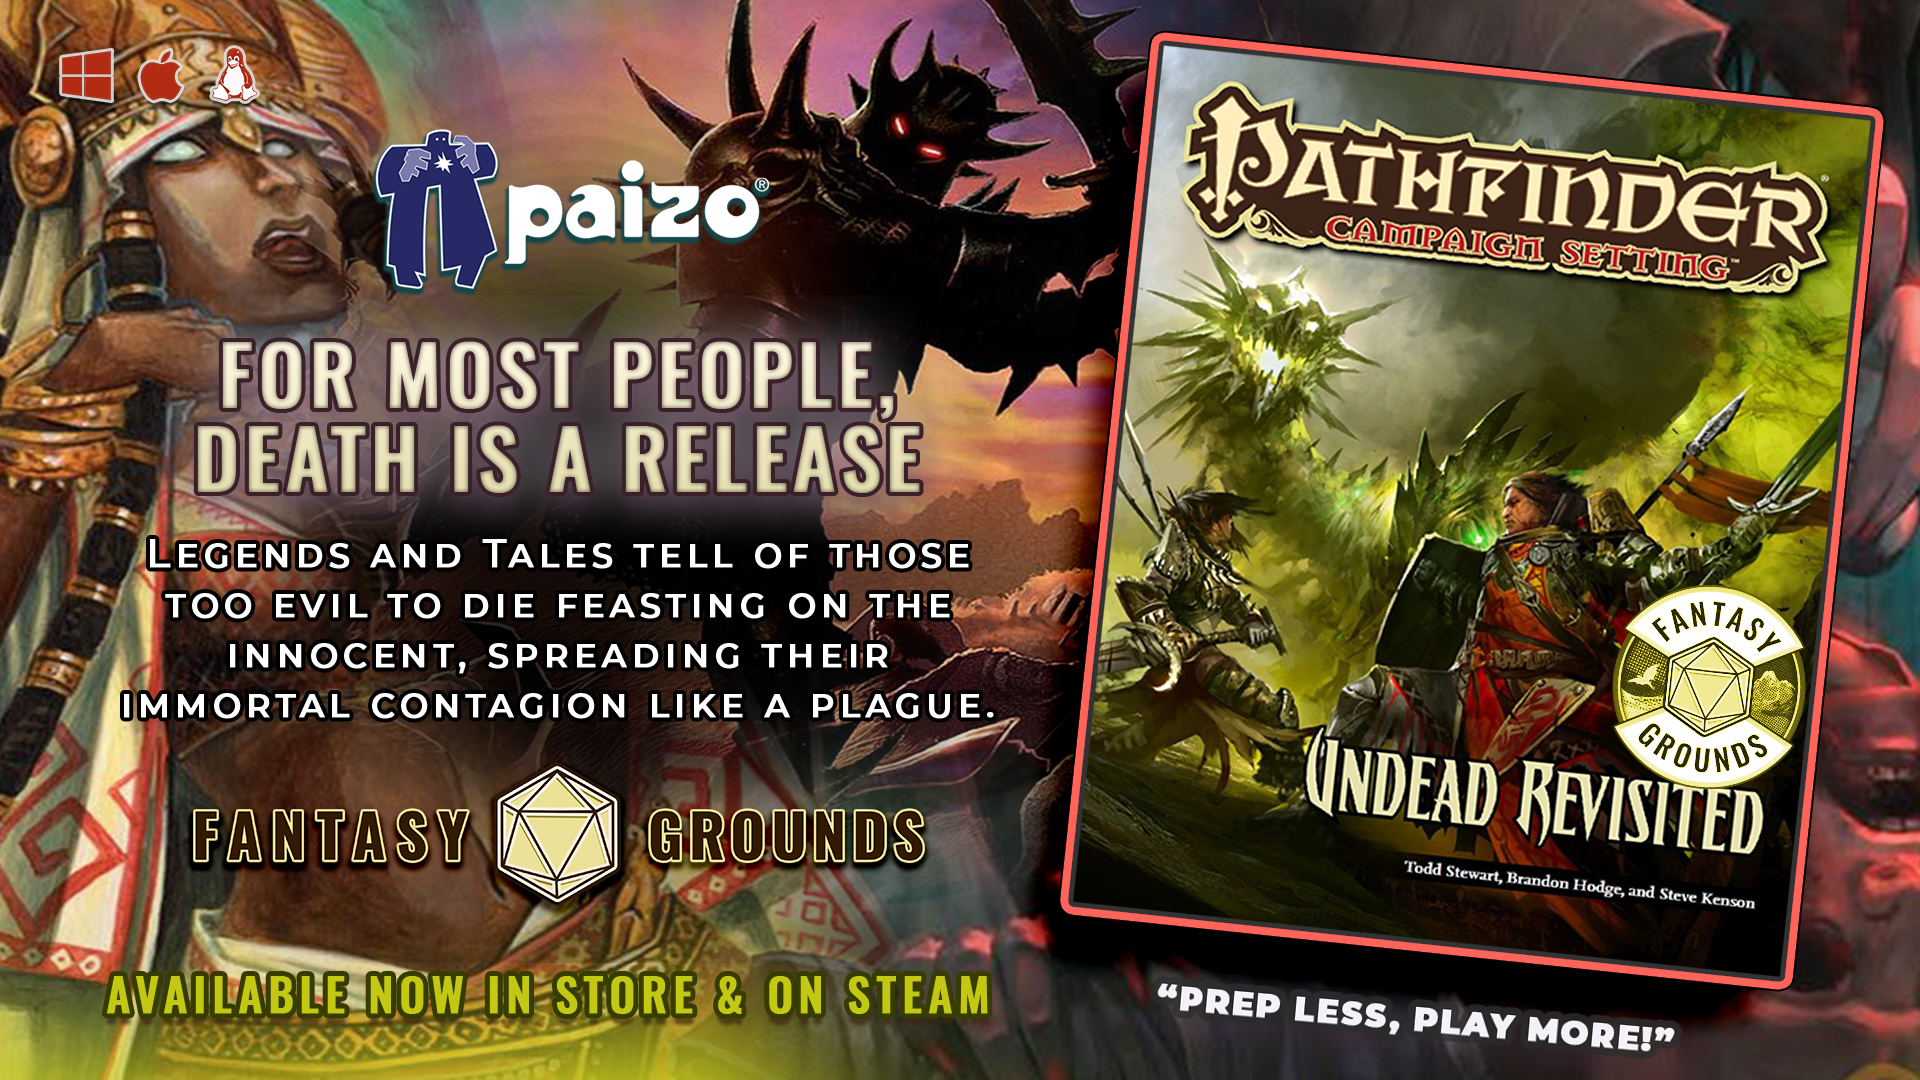 Pathfinder RPG -Campaign Setting Undead Revisited(PZOSMWPZO9233FG).jpg